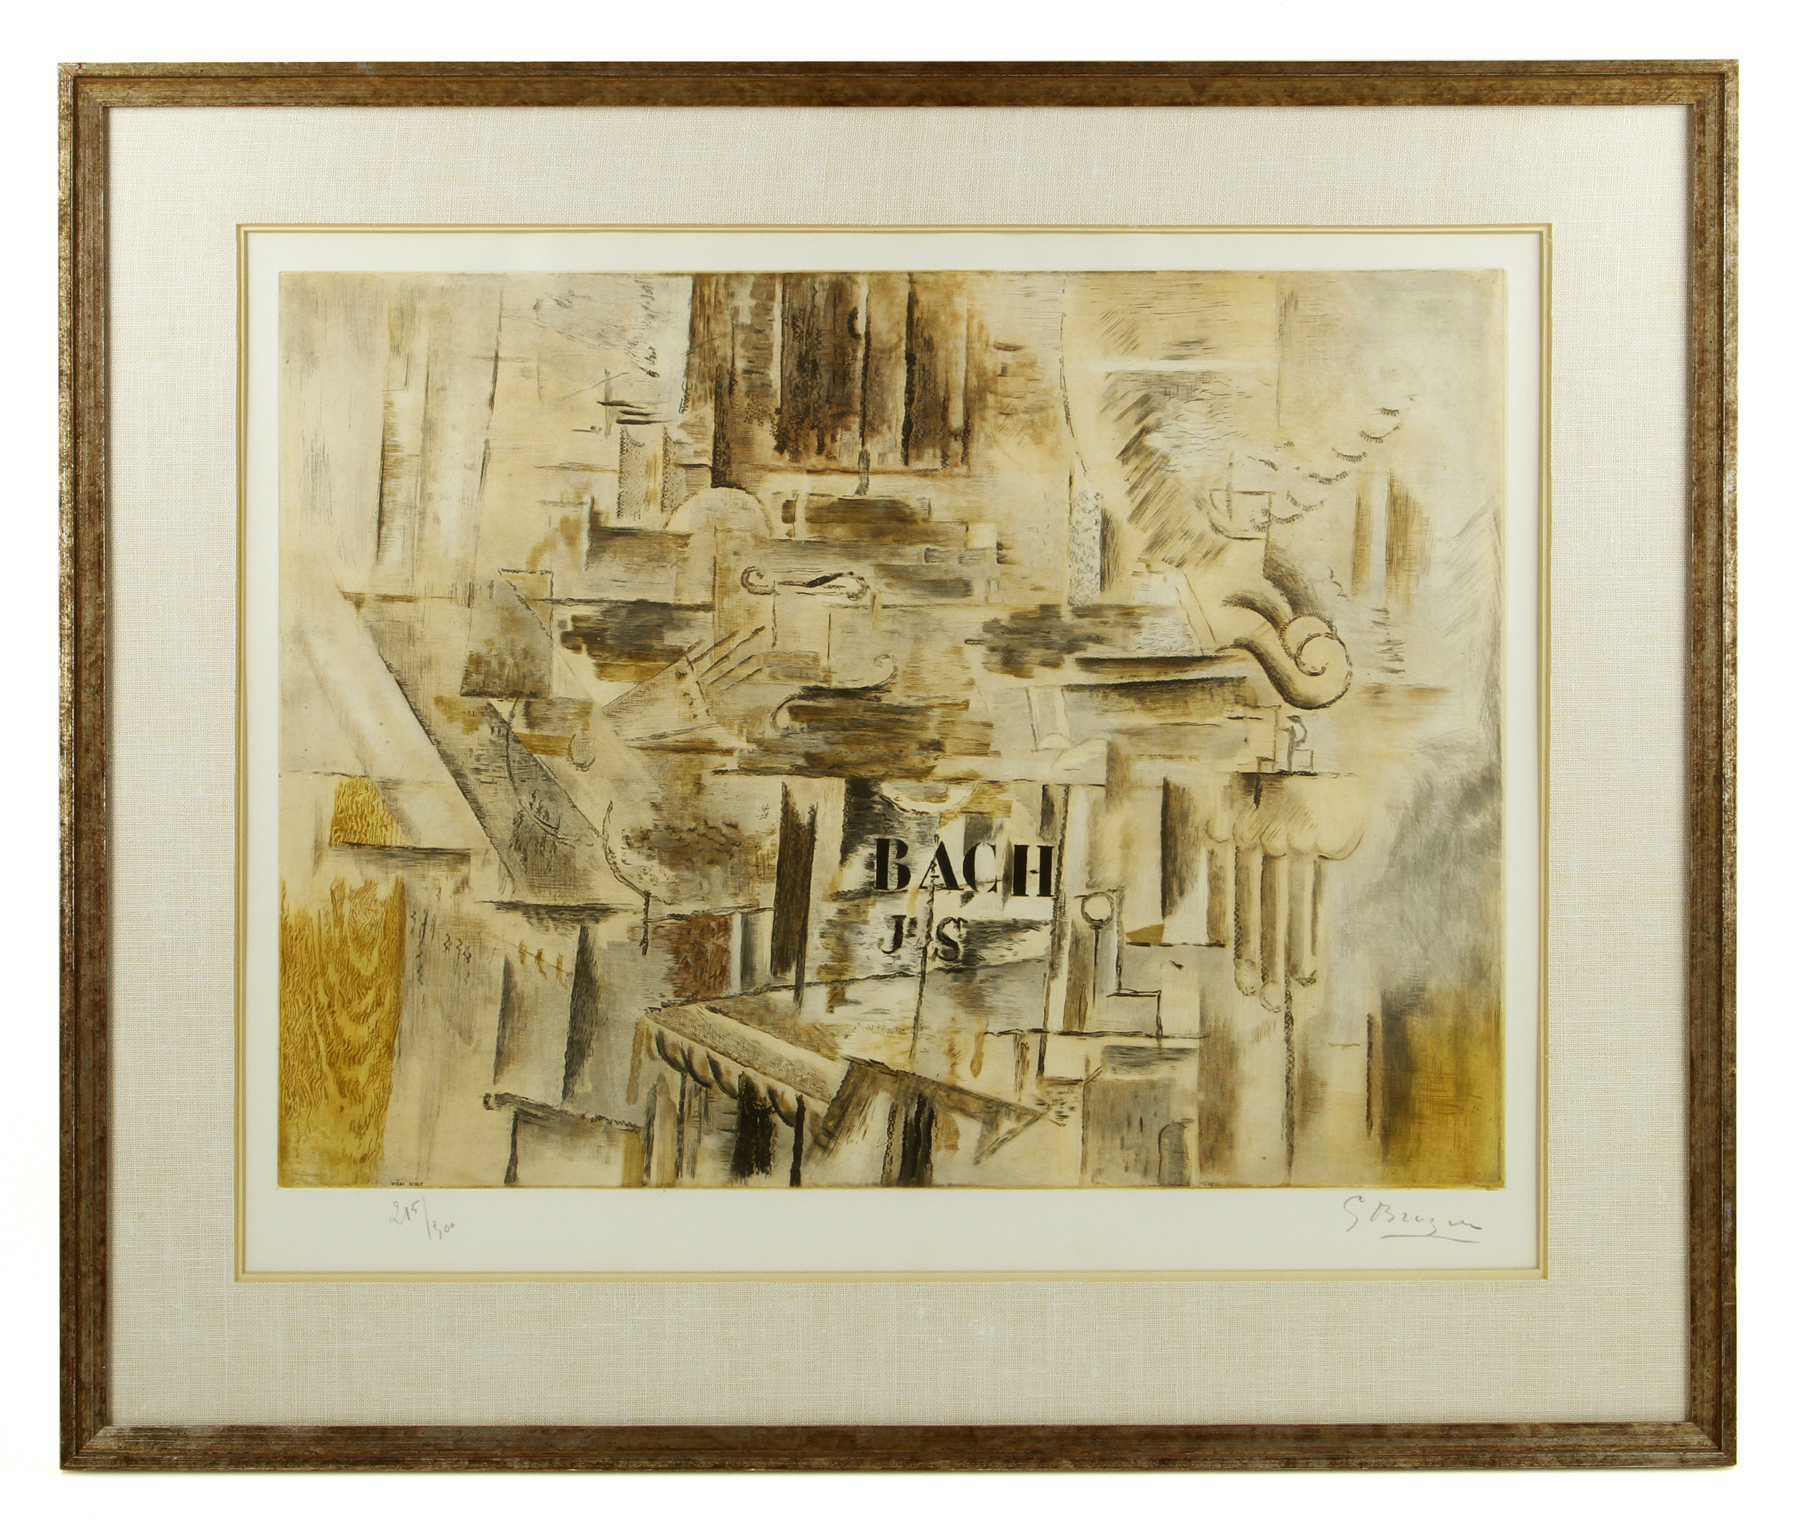 Georges Braque (1882-1963), Homage to Bach, lithograph, 215/300, purchased 1966, signed "G. Braque" i